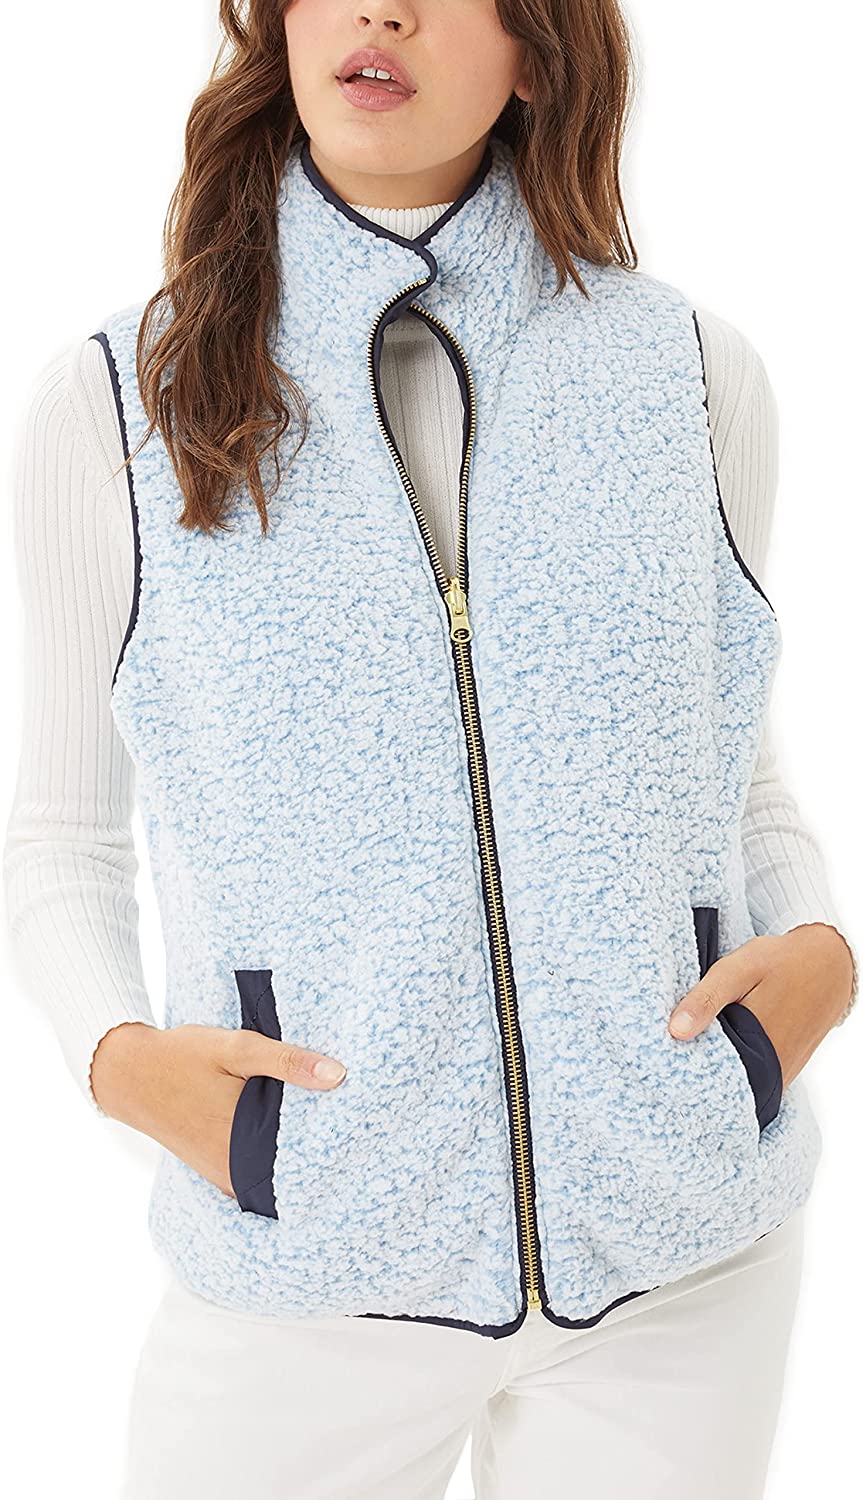 Reversible Sherpa Fleece Zip Up Jacket with Pockets FASHION BOOMY Womens Quilted Padding Vest